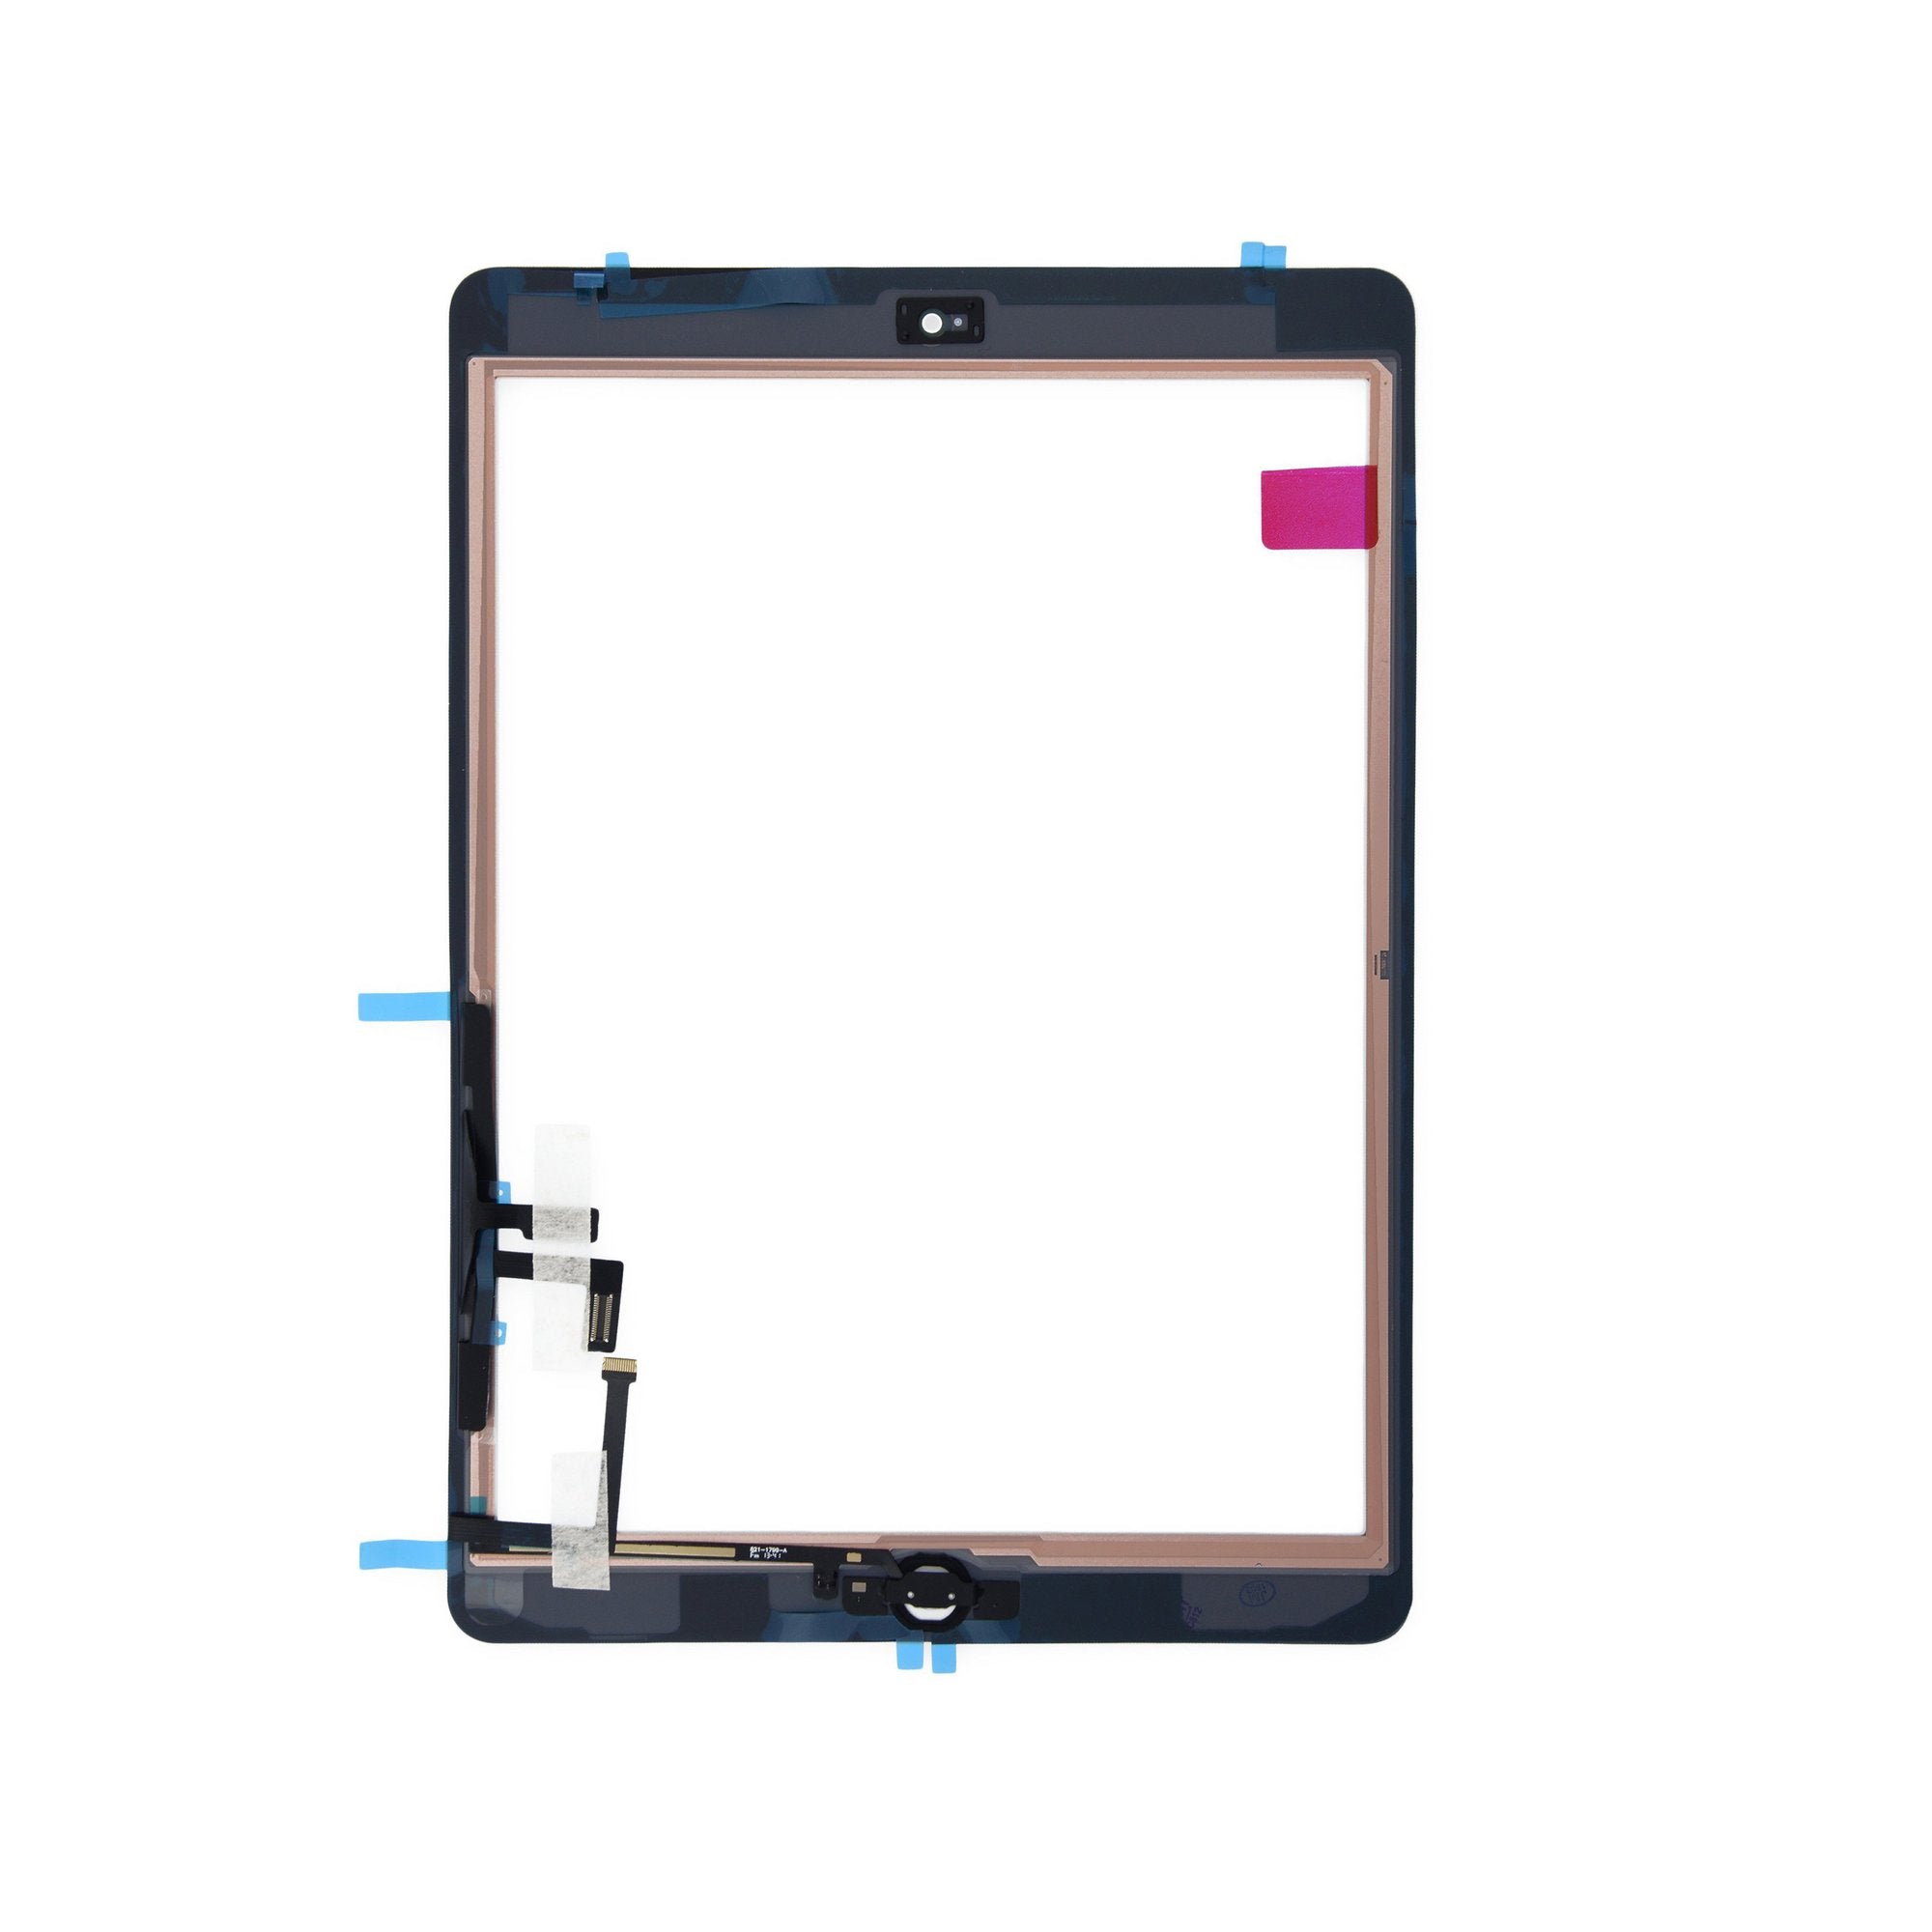 First choose Compatible with ipad Air 1st (5th Generation) A1474 A1475  A1476 Touch Screen Glass Digitizer Replacement, Home Button Flex, Adhesive